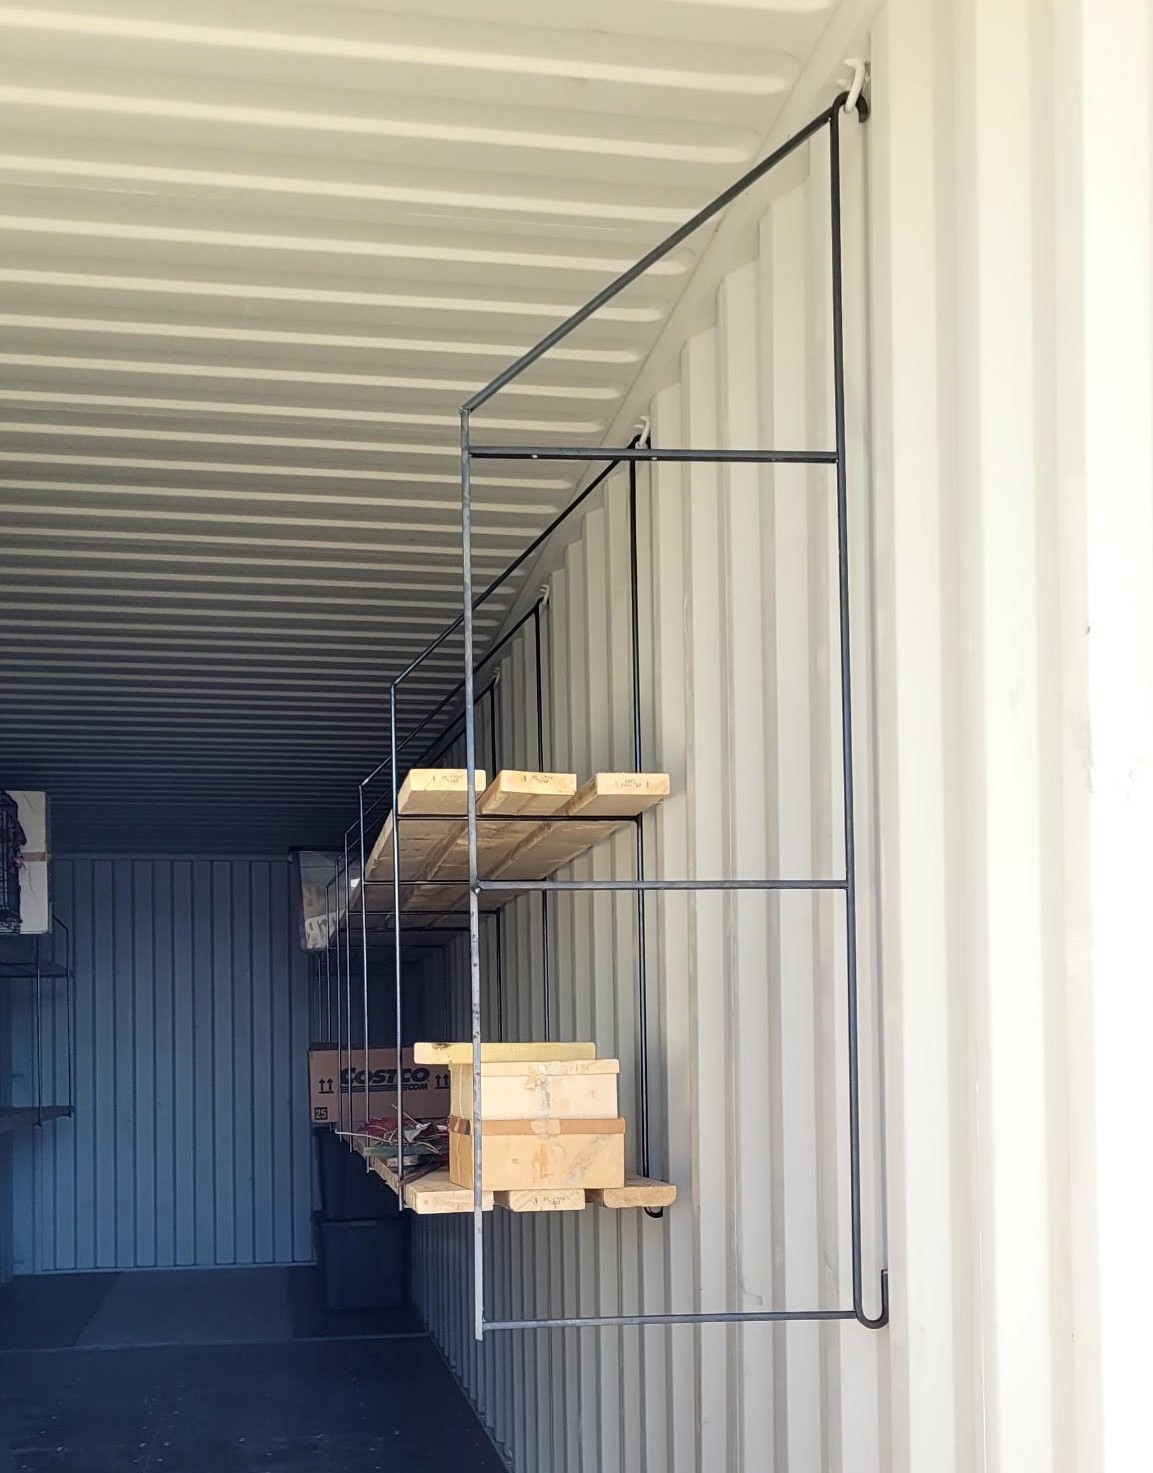 Shipping Container Shelf Brackets - Hooked Storage Container Brackets